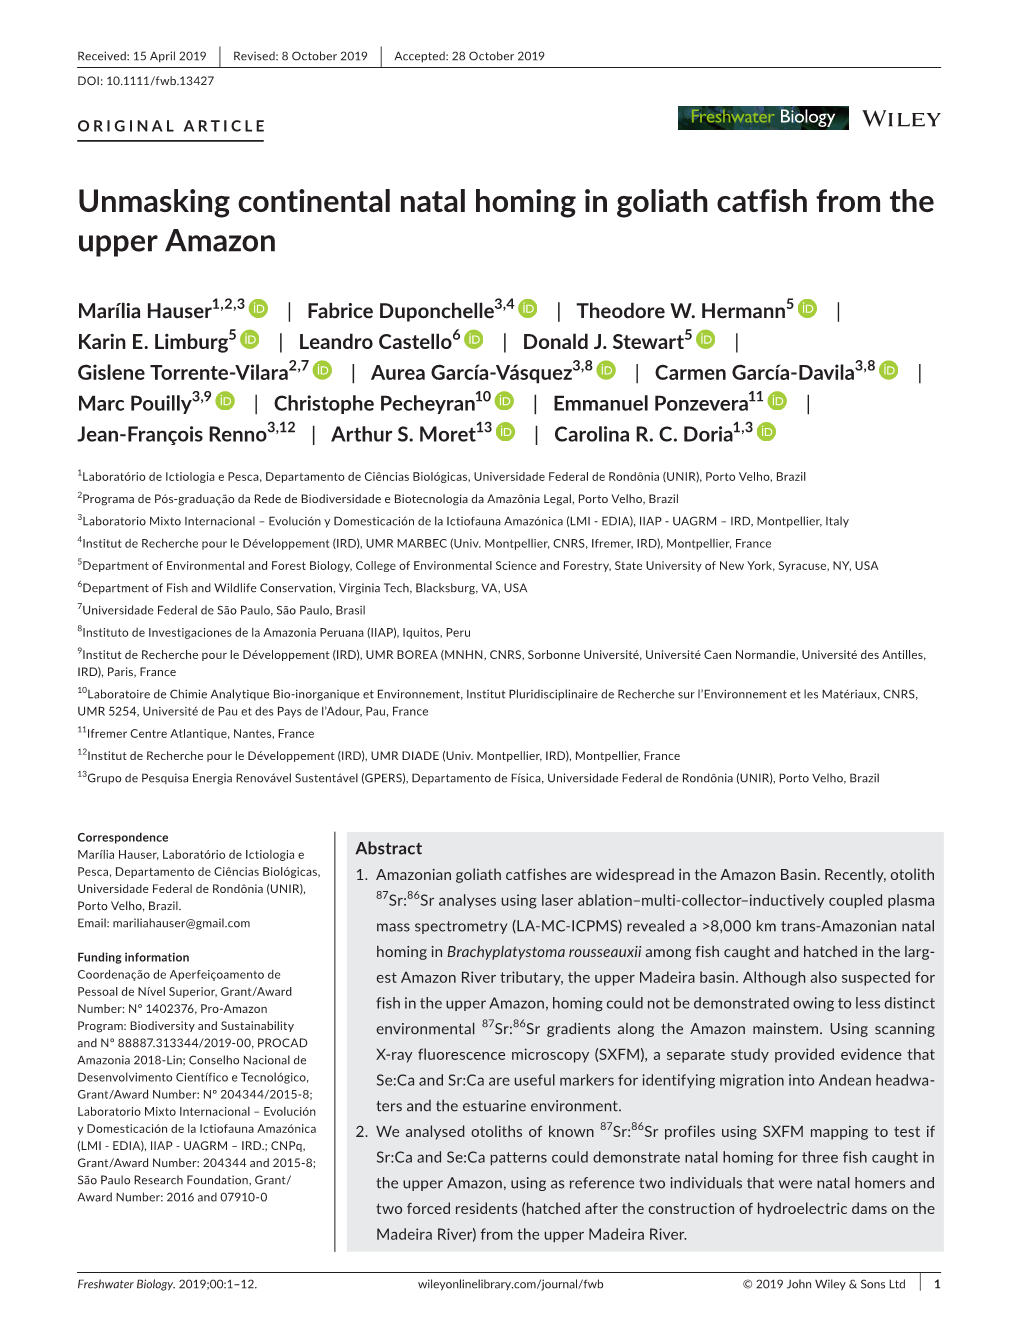 Unmasking Continental Natal Homing in Goliath Catfish from the Upper Amazon